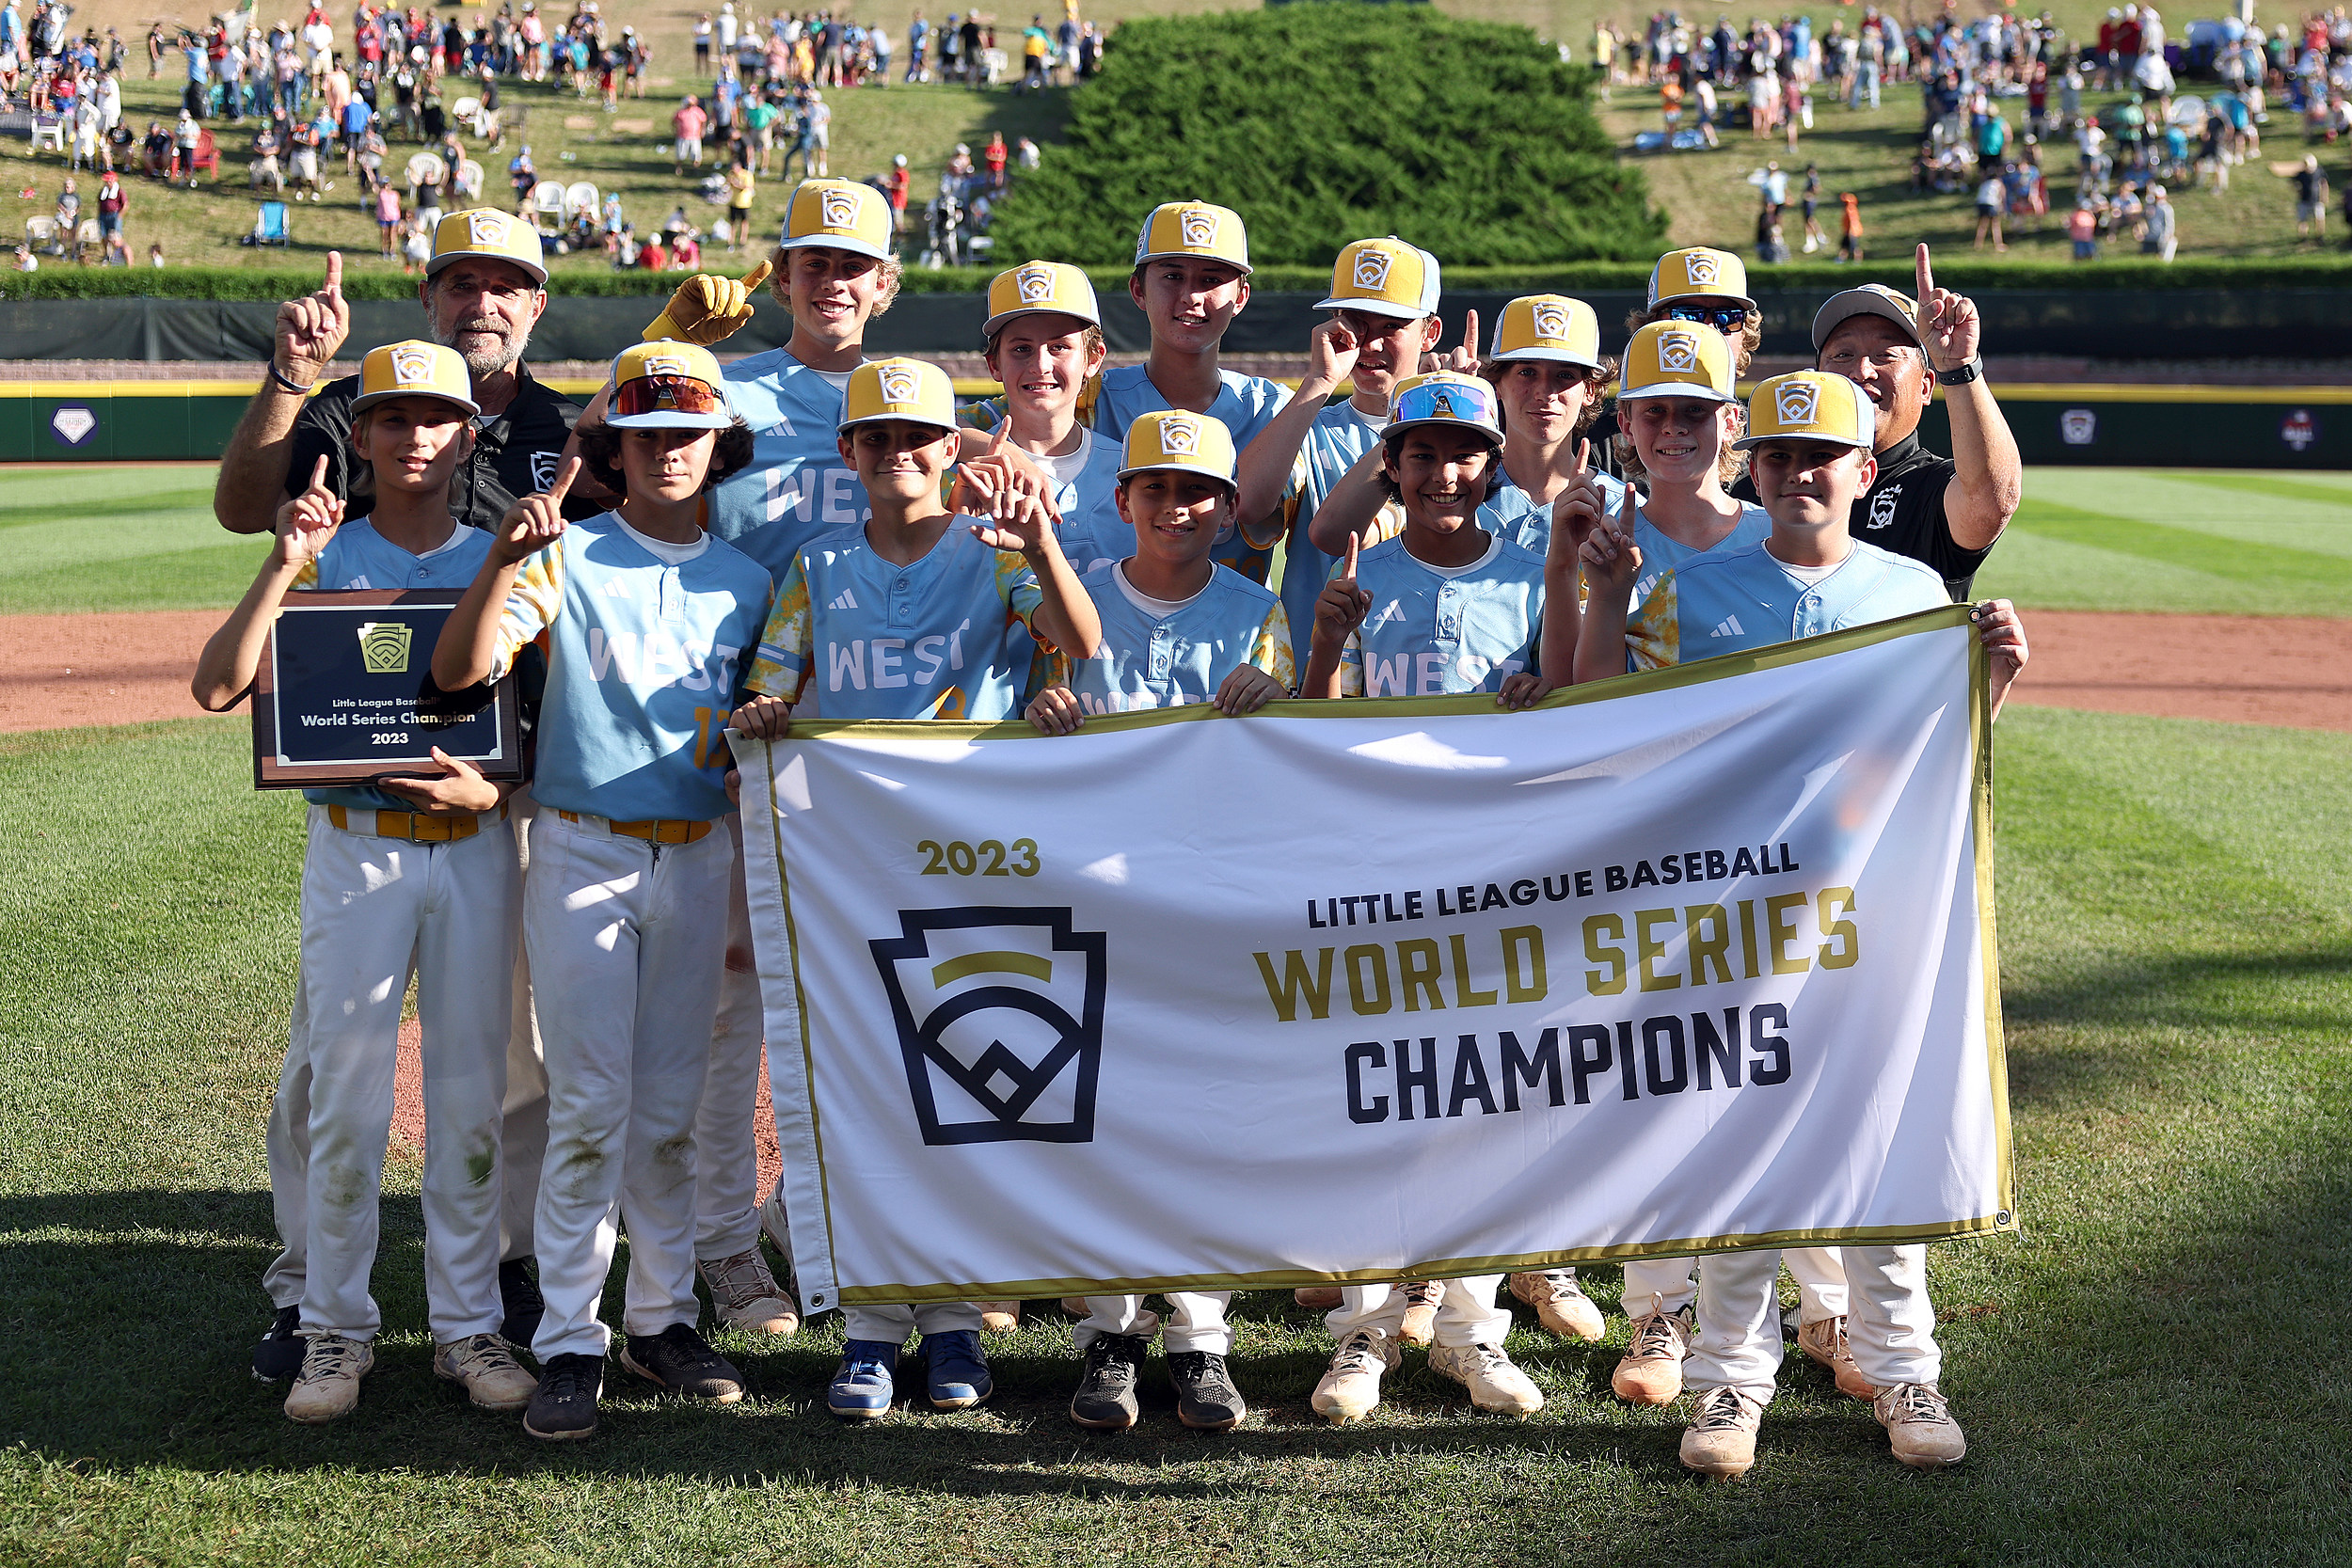 Northeast Seattle's historic run ends in LLWS elimination game against  California